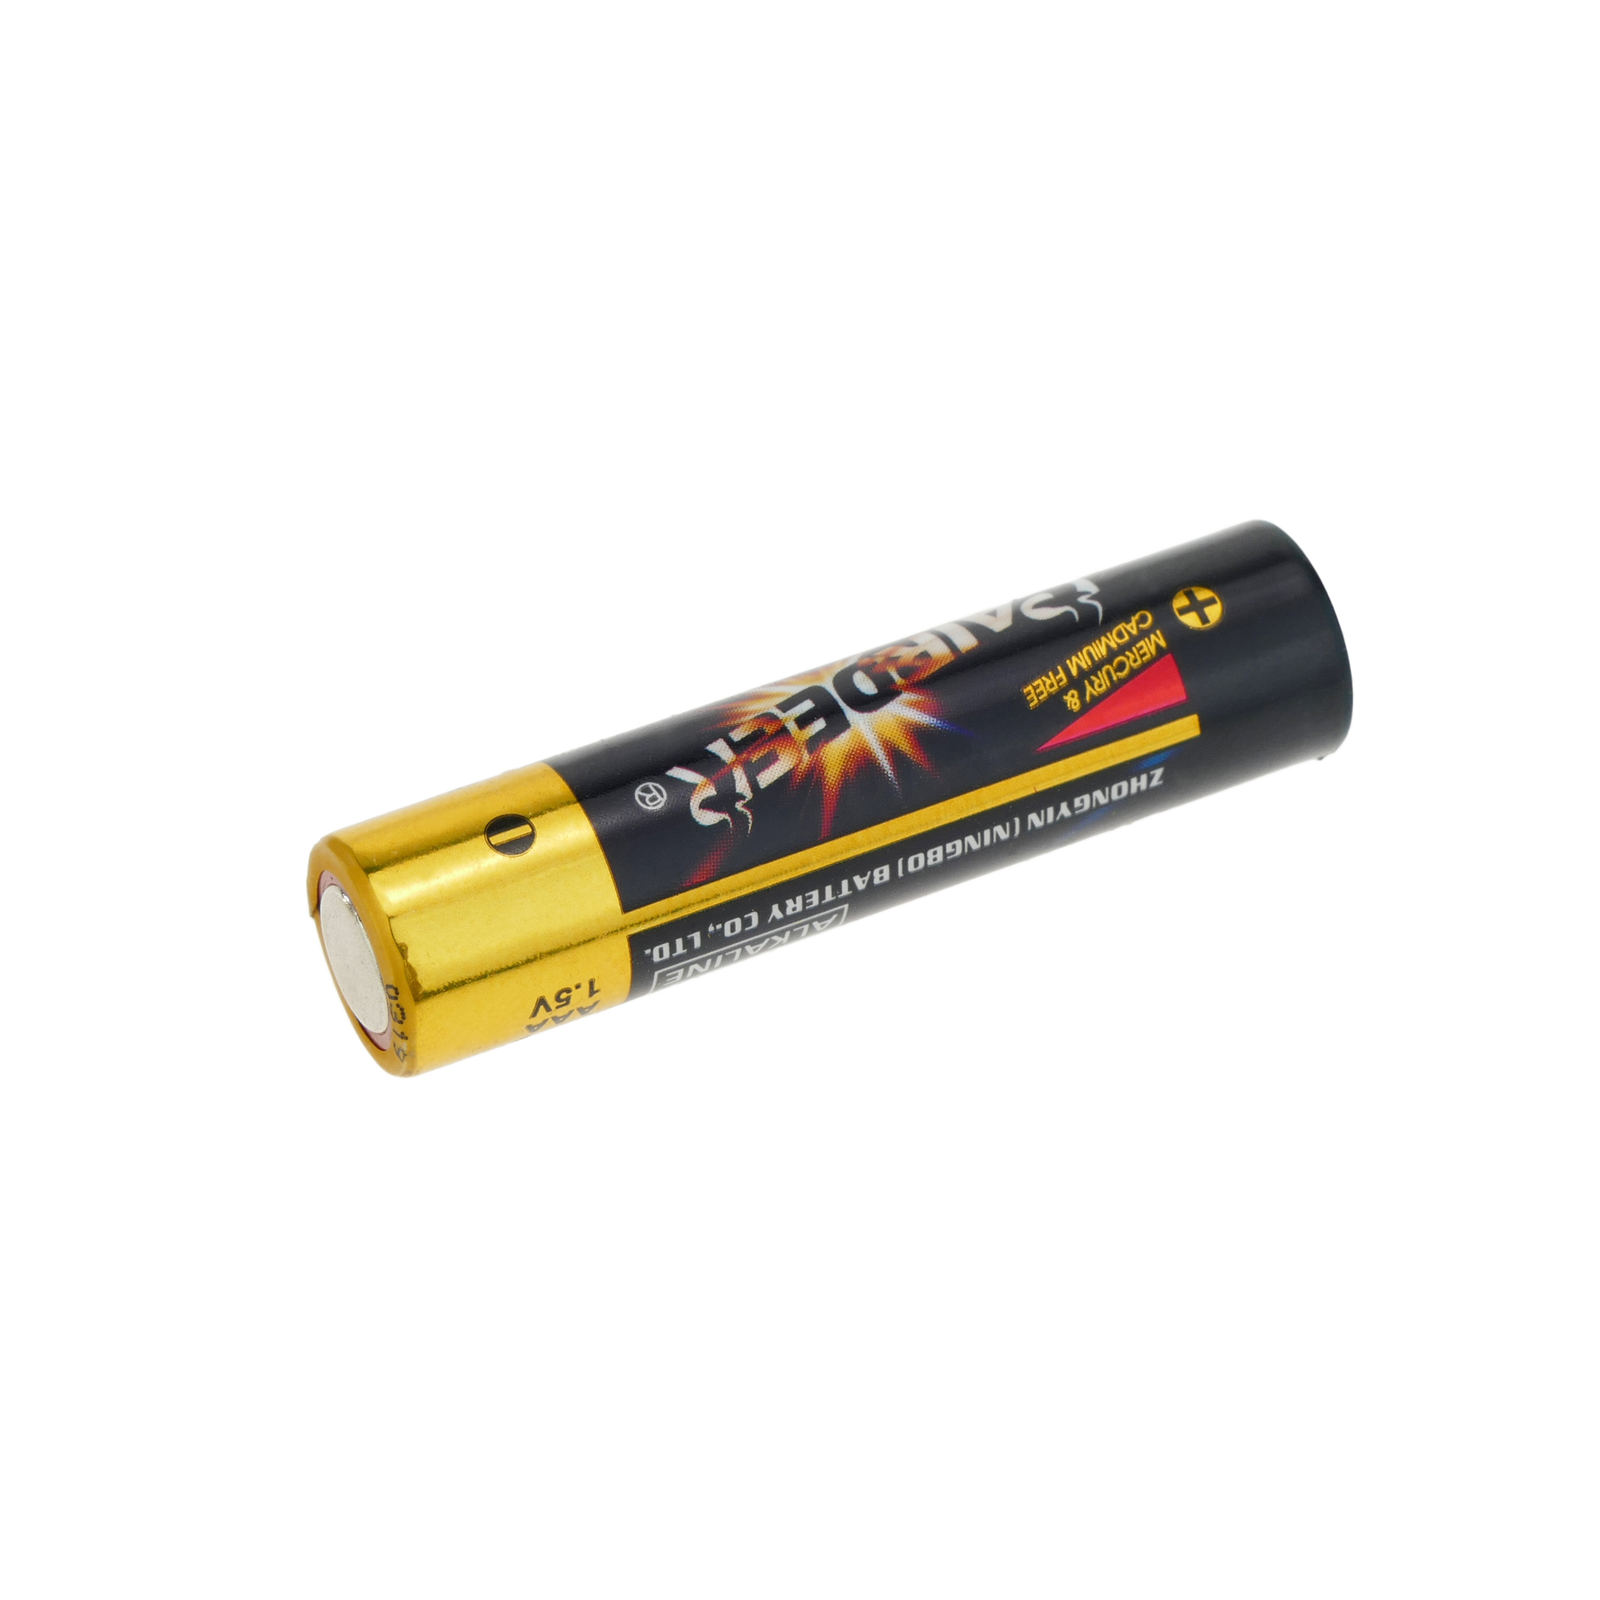 LR03 1.5V AAA Alkaline Battery 4 units - Cablematic